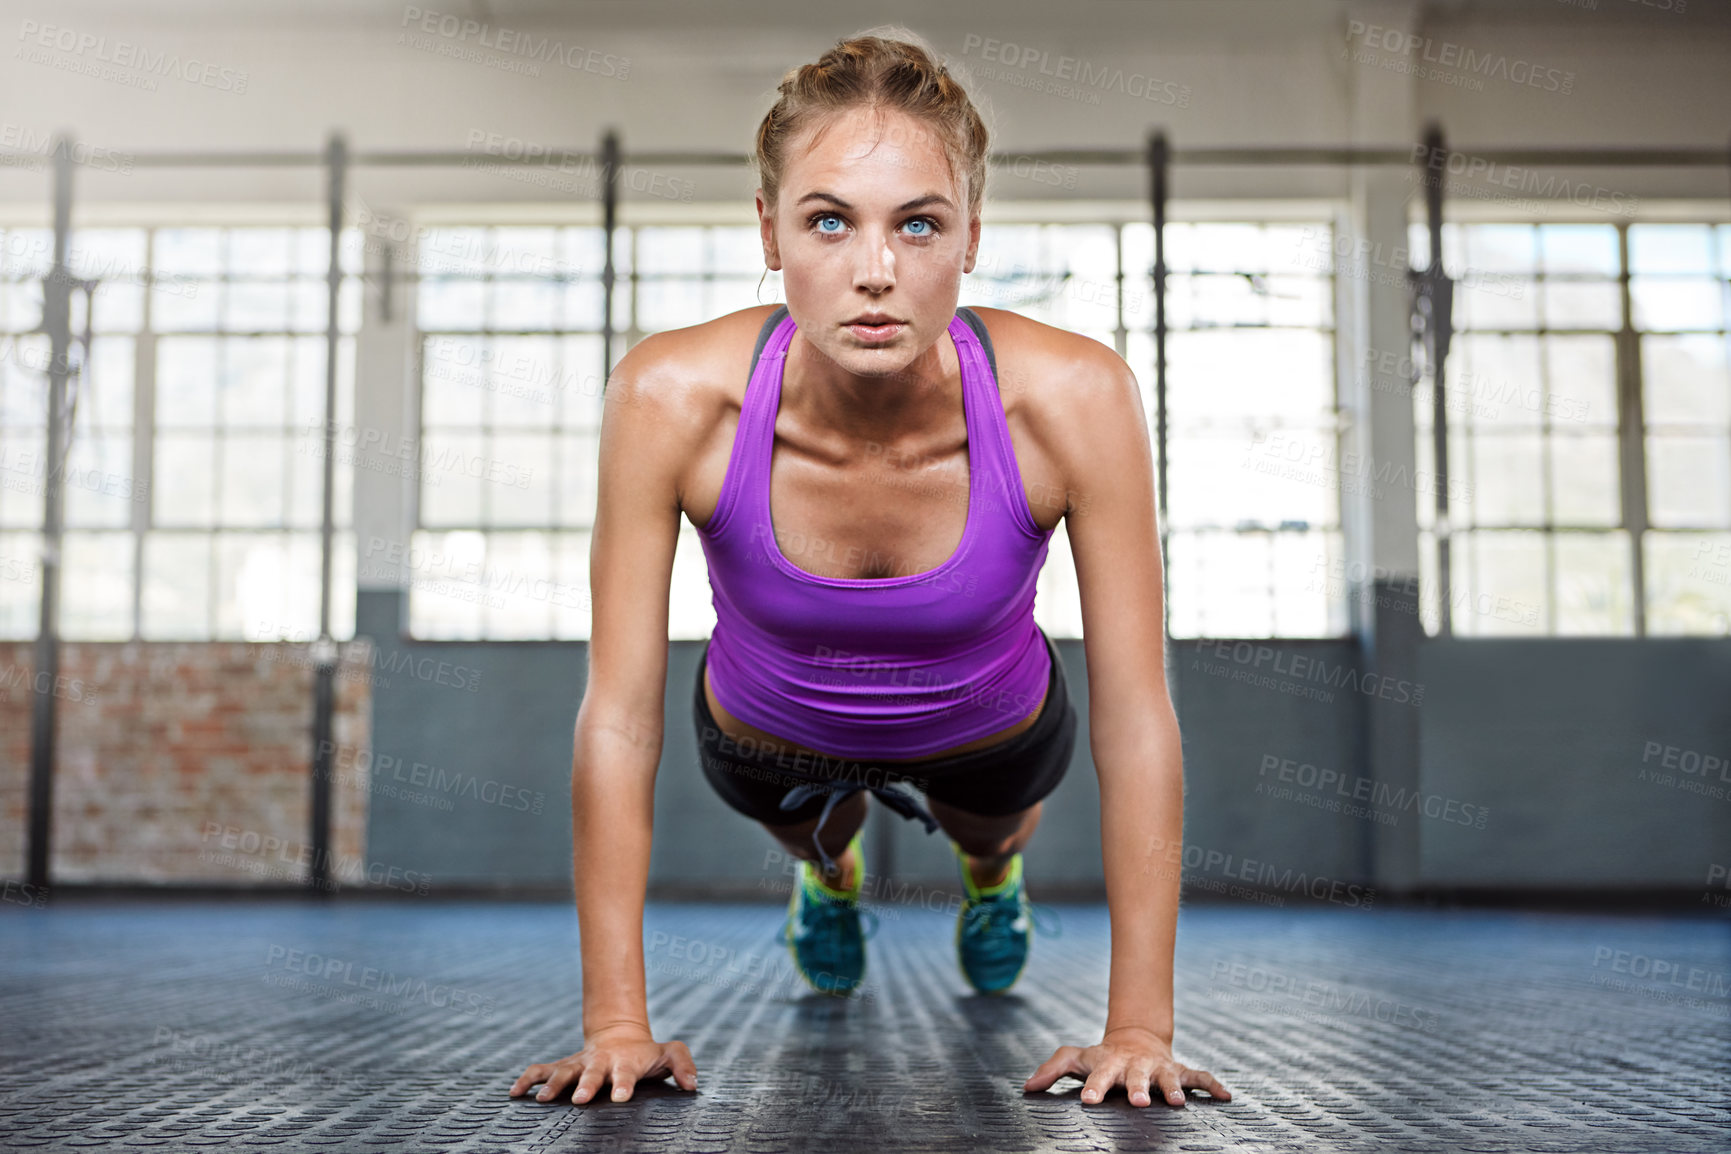 Buy stock photo Shot of a sporty young woman doing push-ups at the gym